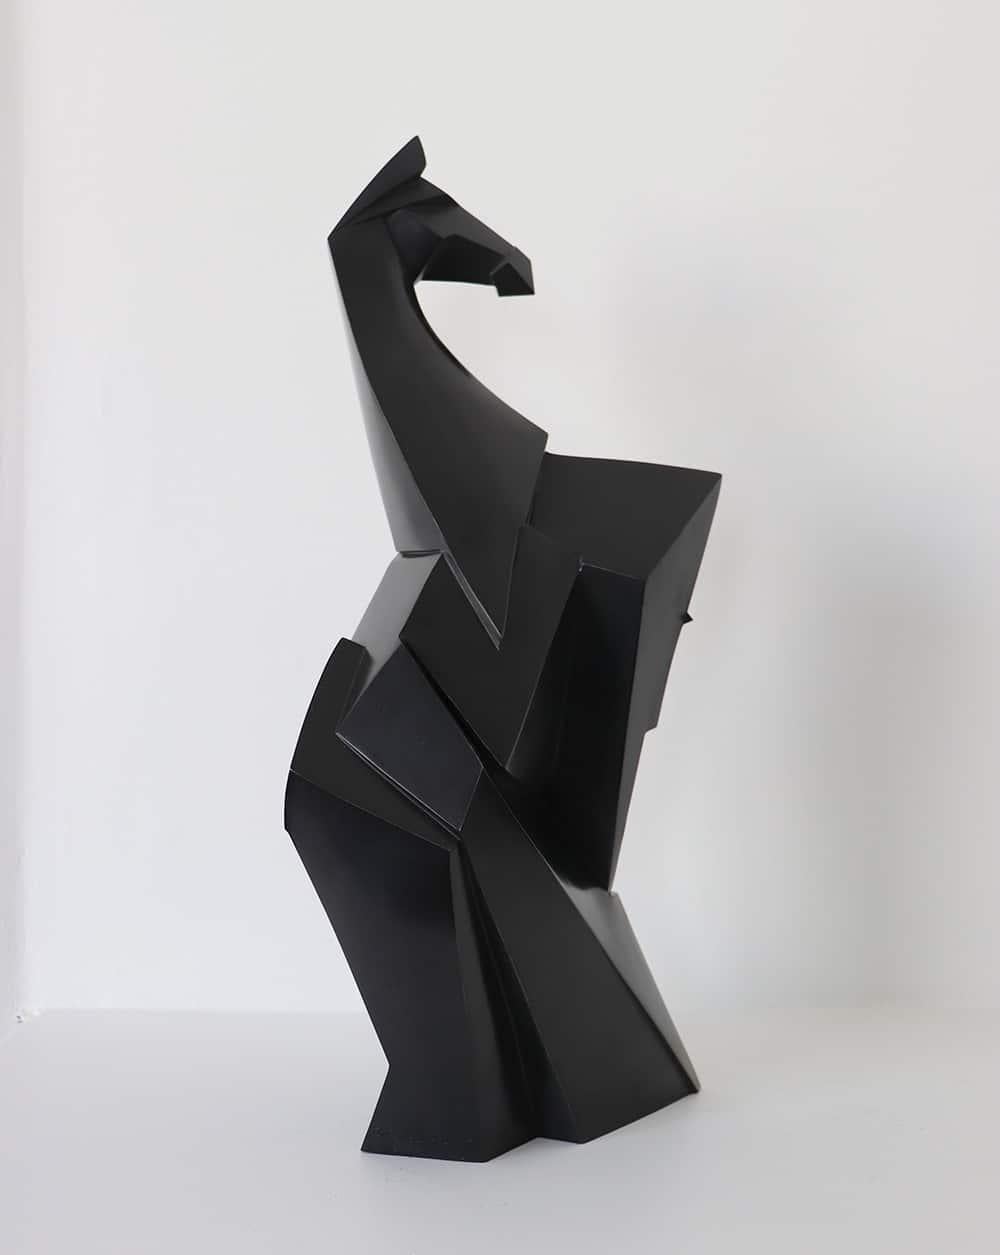 Kionero is a bronze sculpture by contemporary artist Jacques Owczarek, dimensions are 48 × 28 × 16.5 cm (18.9 × 11 × 6.5 in). 
The sculpture is signed and numbered, it is part of a limited edition of 8 editions + 4 artist’s proofs, and comes with a